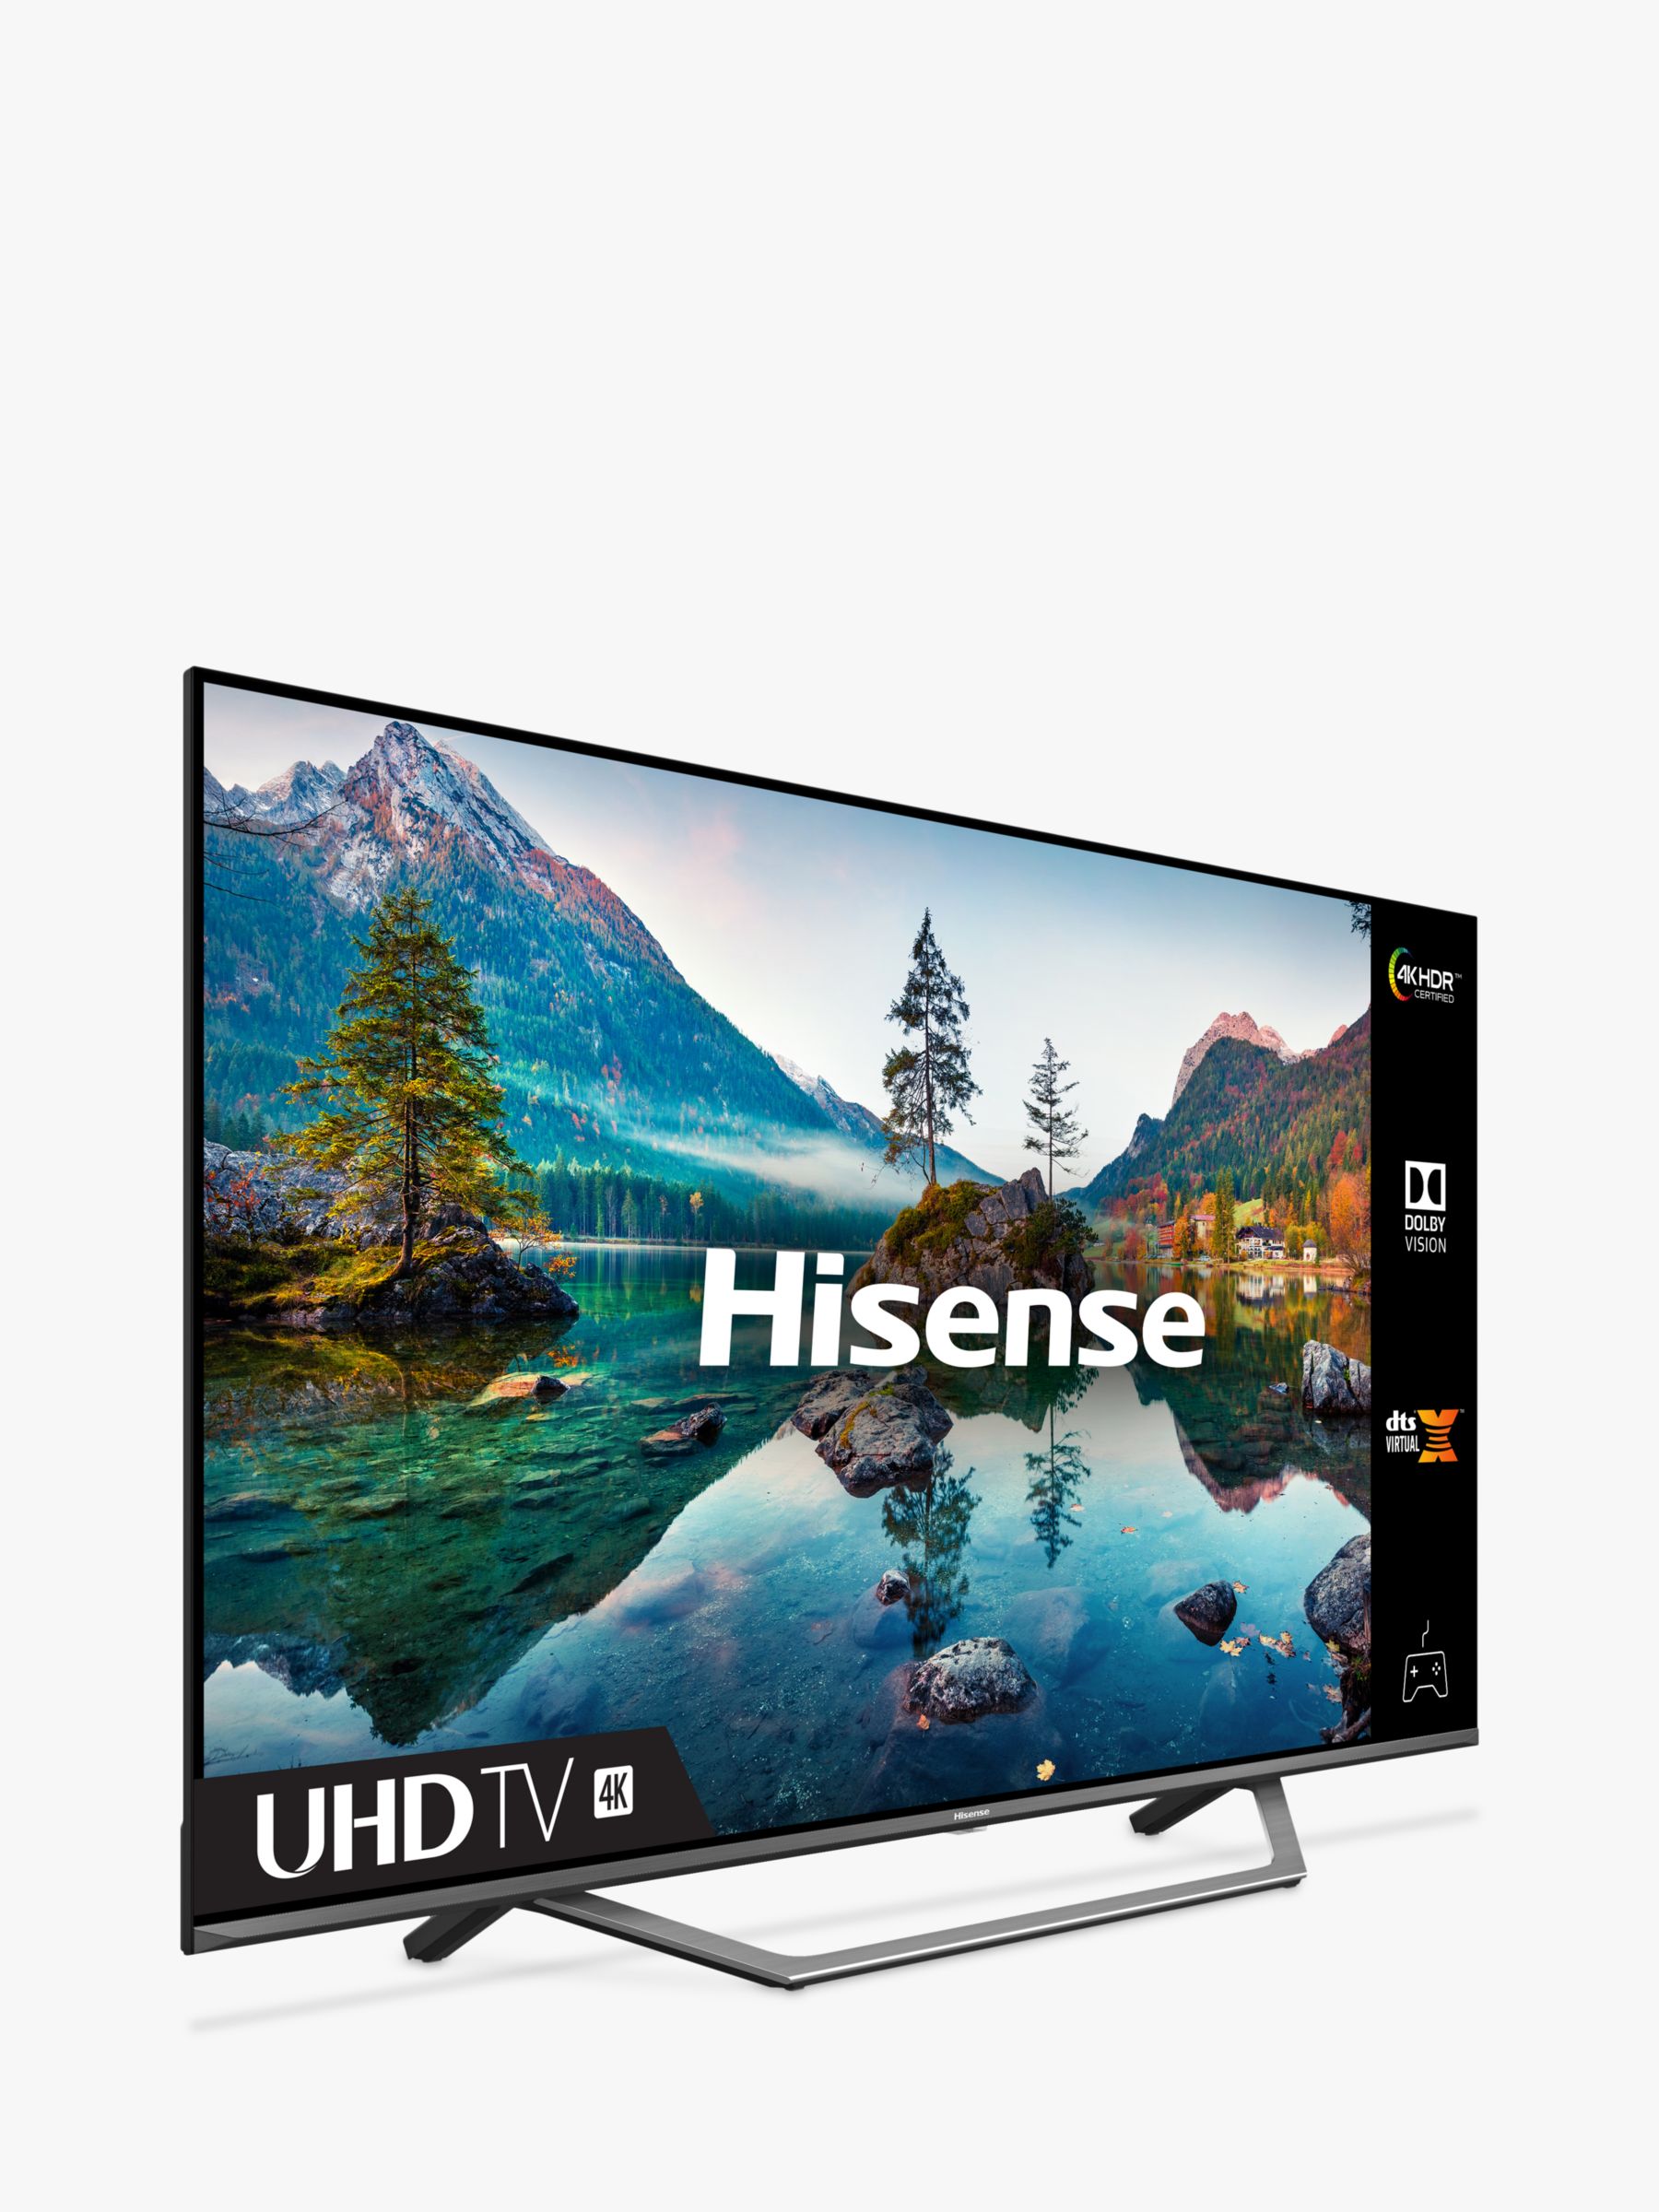 HISENSE 50A7100FTUK 50-inch 4K UHD HDR Smart TV with Freeview play 2020 series and Alexa Built-in